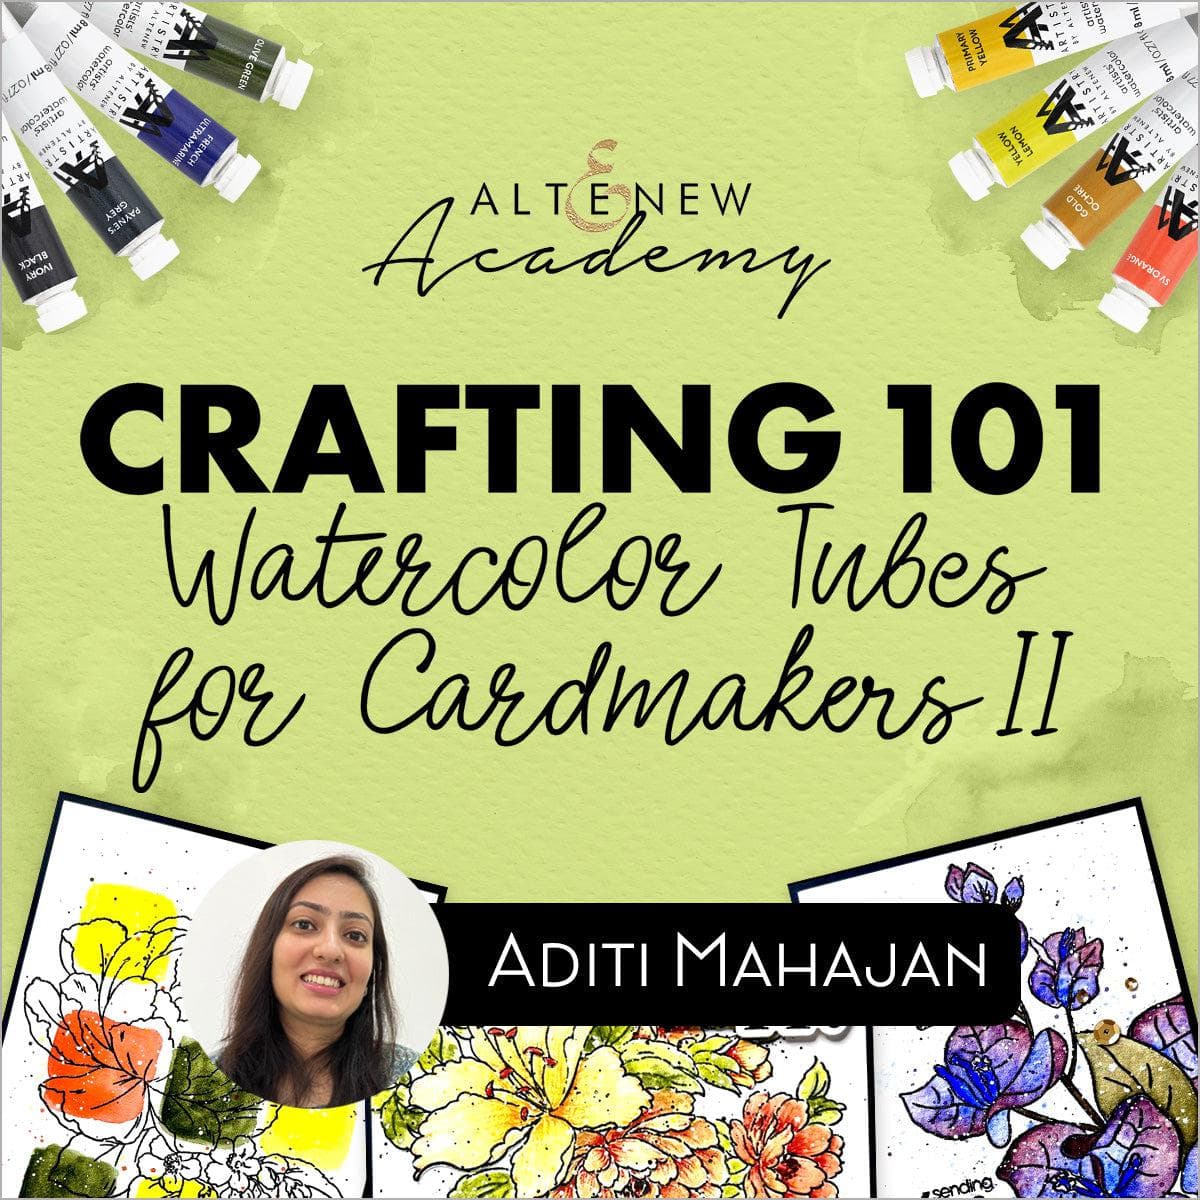 Crafting 101 - Watercolor Tubes for Cardmakers II